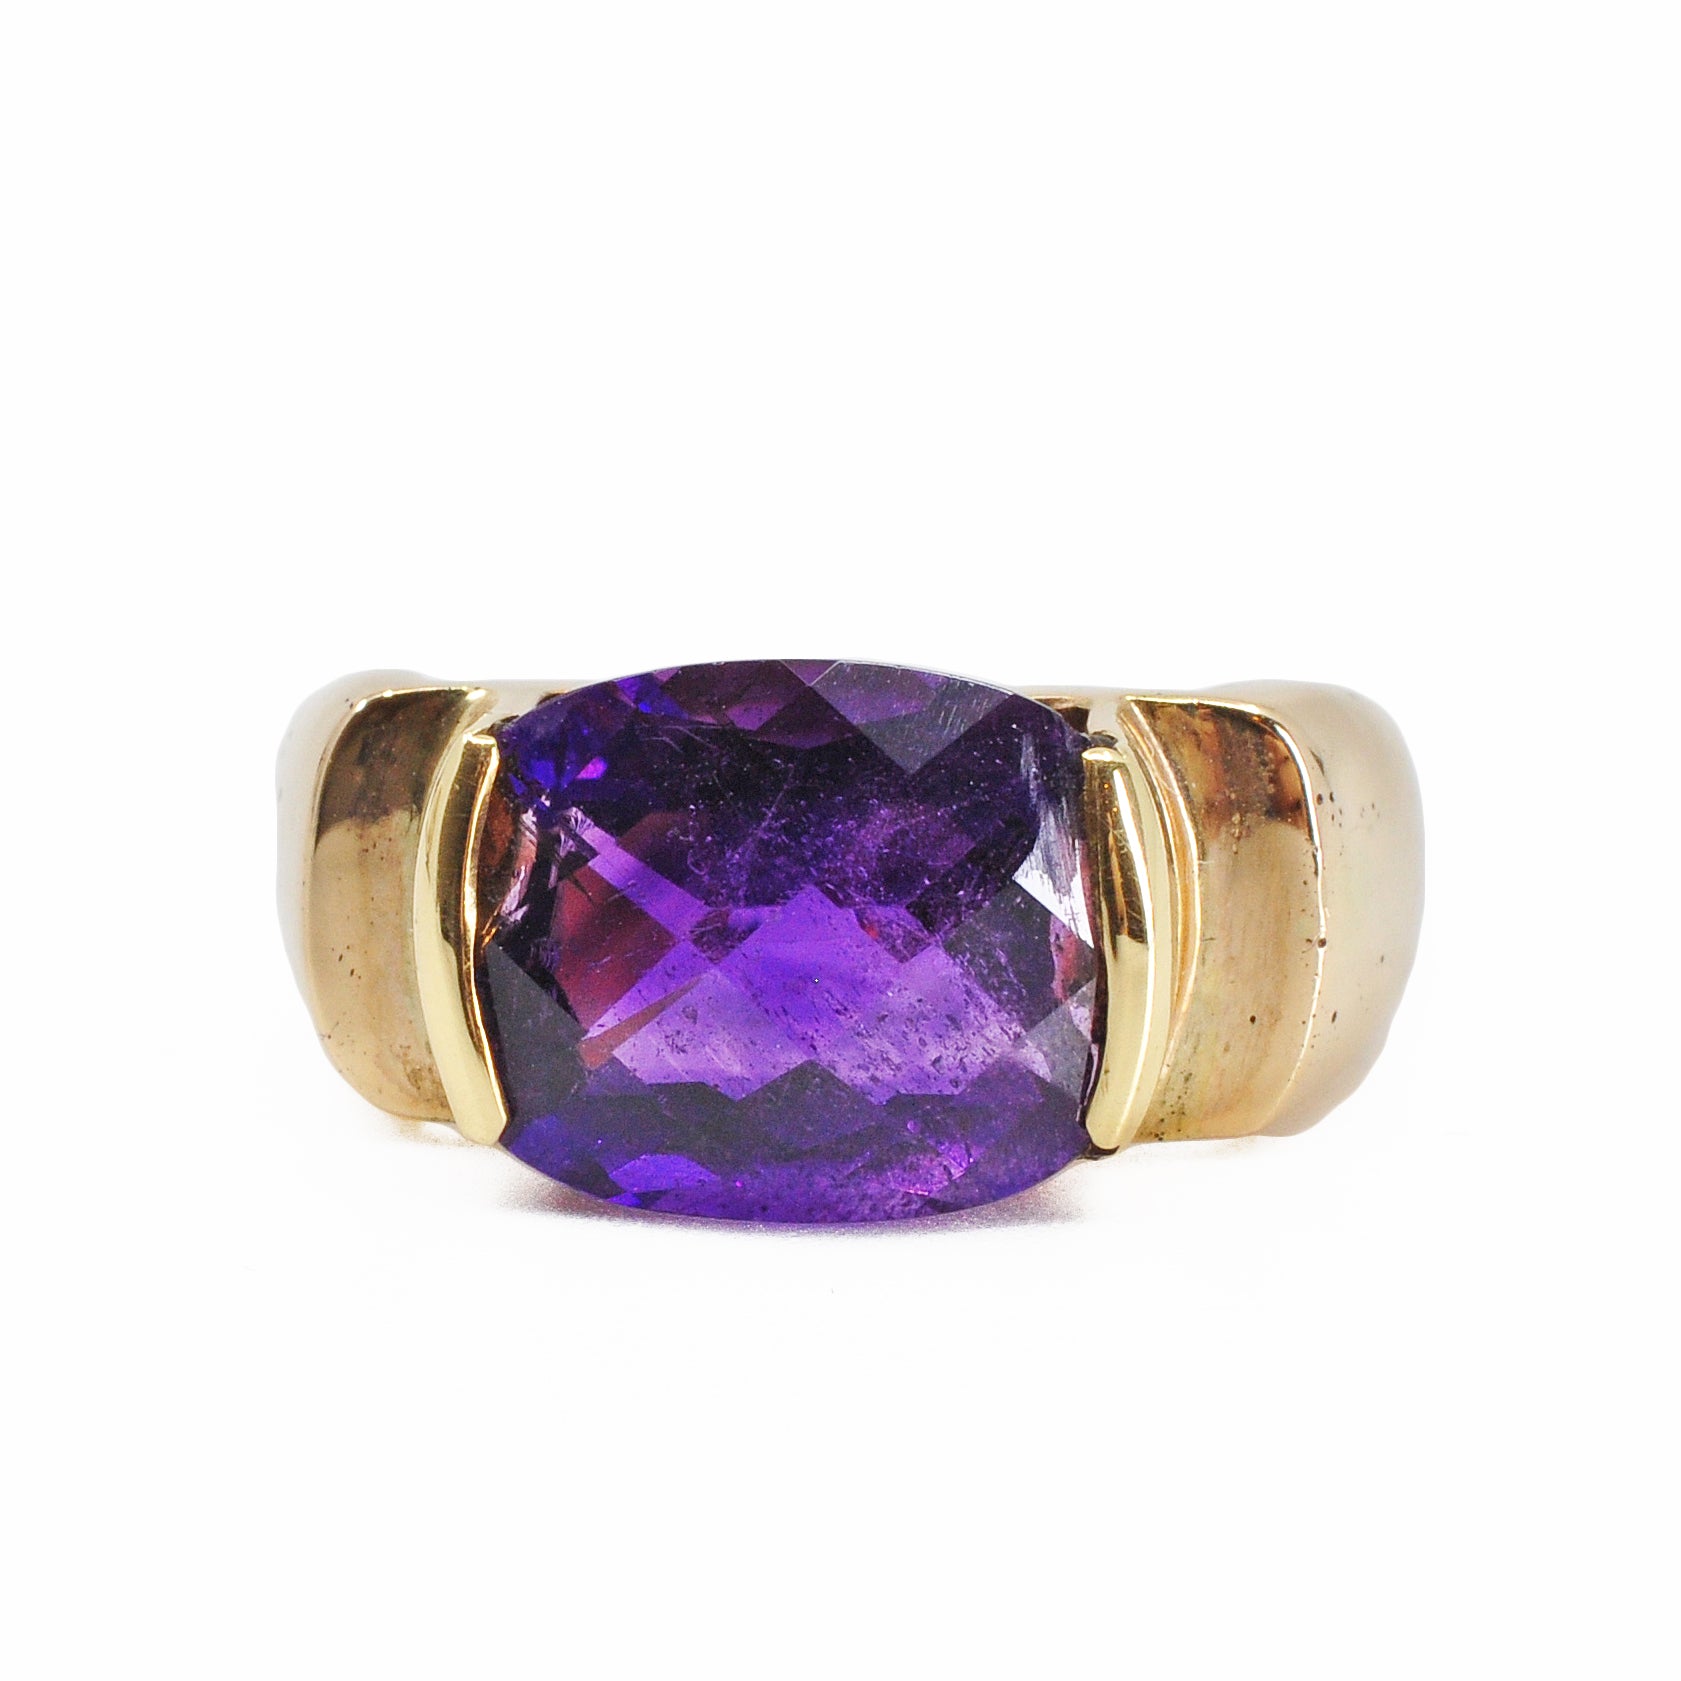 African Amethyst 12.01 mm 4.22 ct Faceted Cushion 14K Handcrafted Gemstone Cantilever Ring - OO-092-01 - Crystalarium